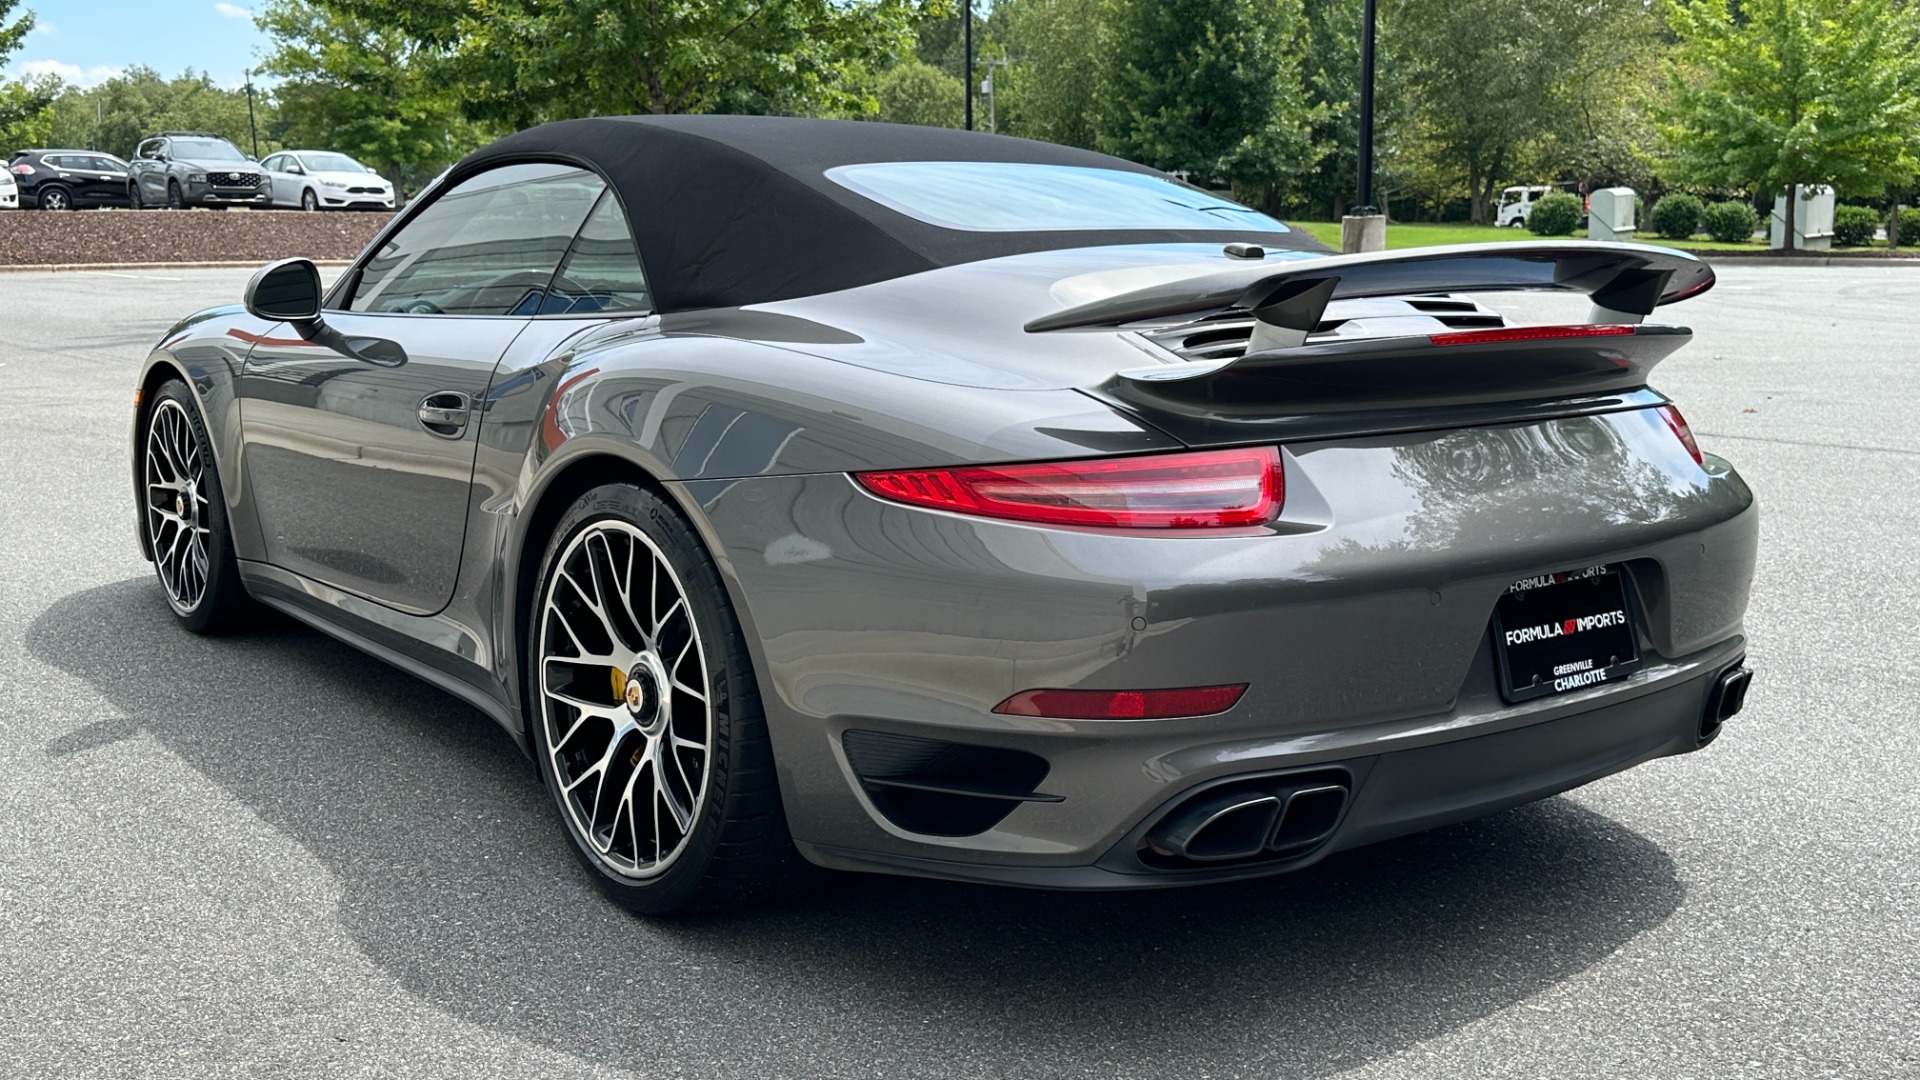 Used 2015 Porsche 911 TURBO S / BYDESIGN STAGE 4.2 POWER PACKAGE / $30K IN UPGRADES / APPLE CARPL for sale $118,999 at Formula Imports in Charlotte NC 28227 7